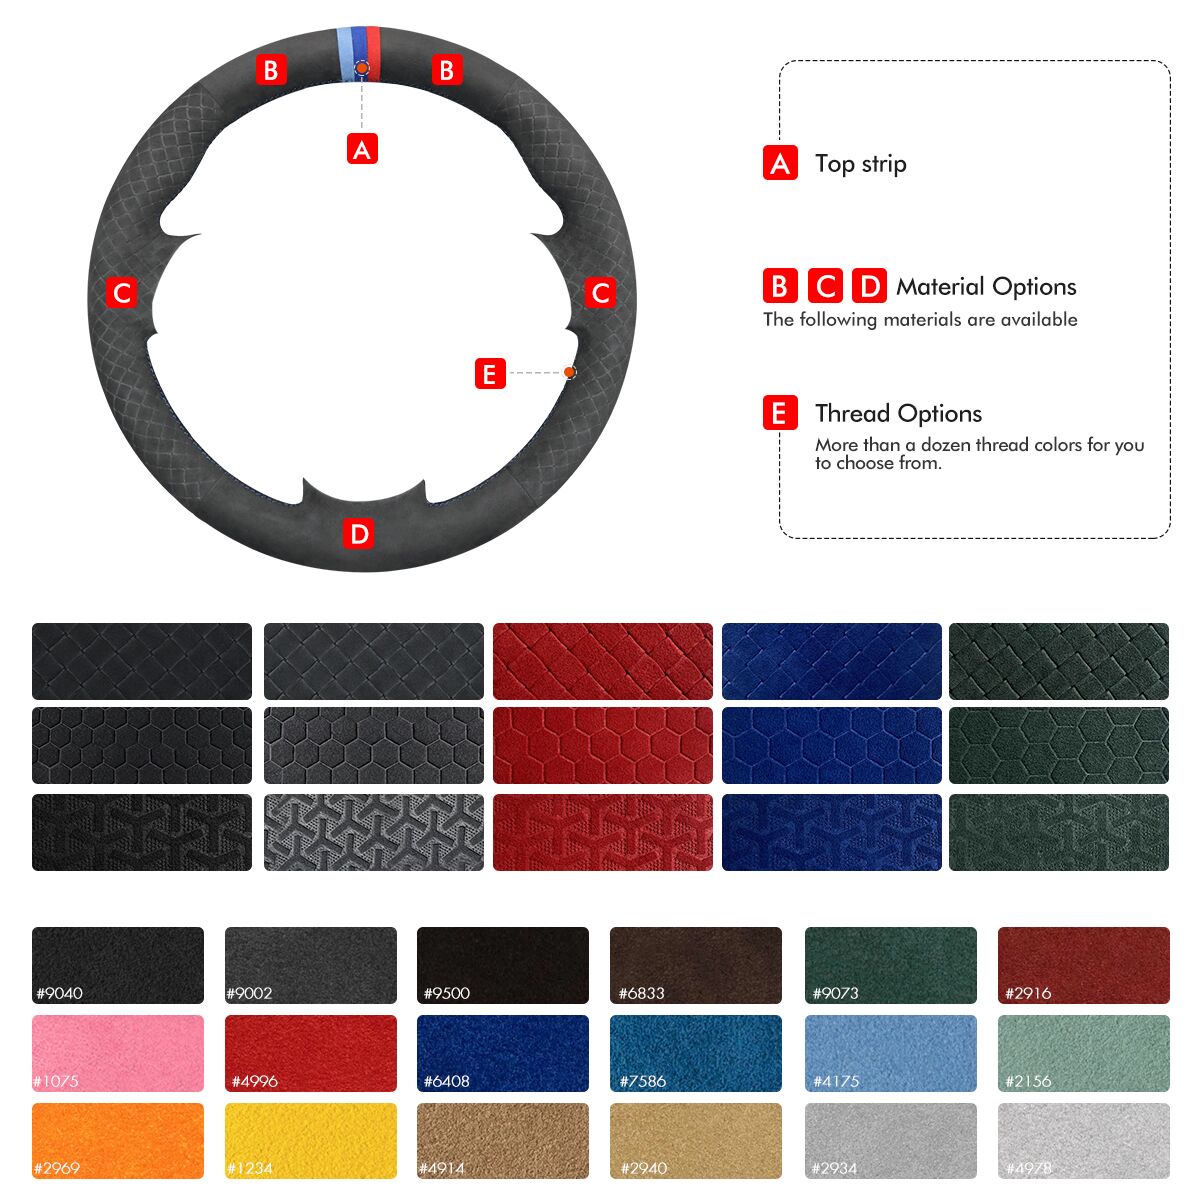 MEWANT Hand Stitch Leather Suede Car Steering Wheel Cover for Volkswagen VW Golf 5 Polo Jetta Passat Touran Caddy EOS